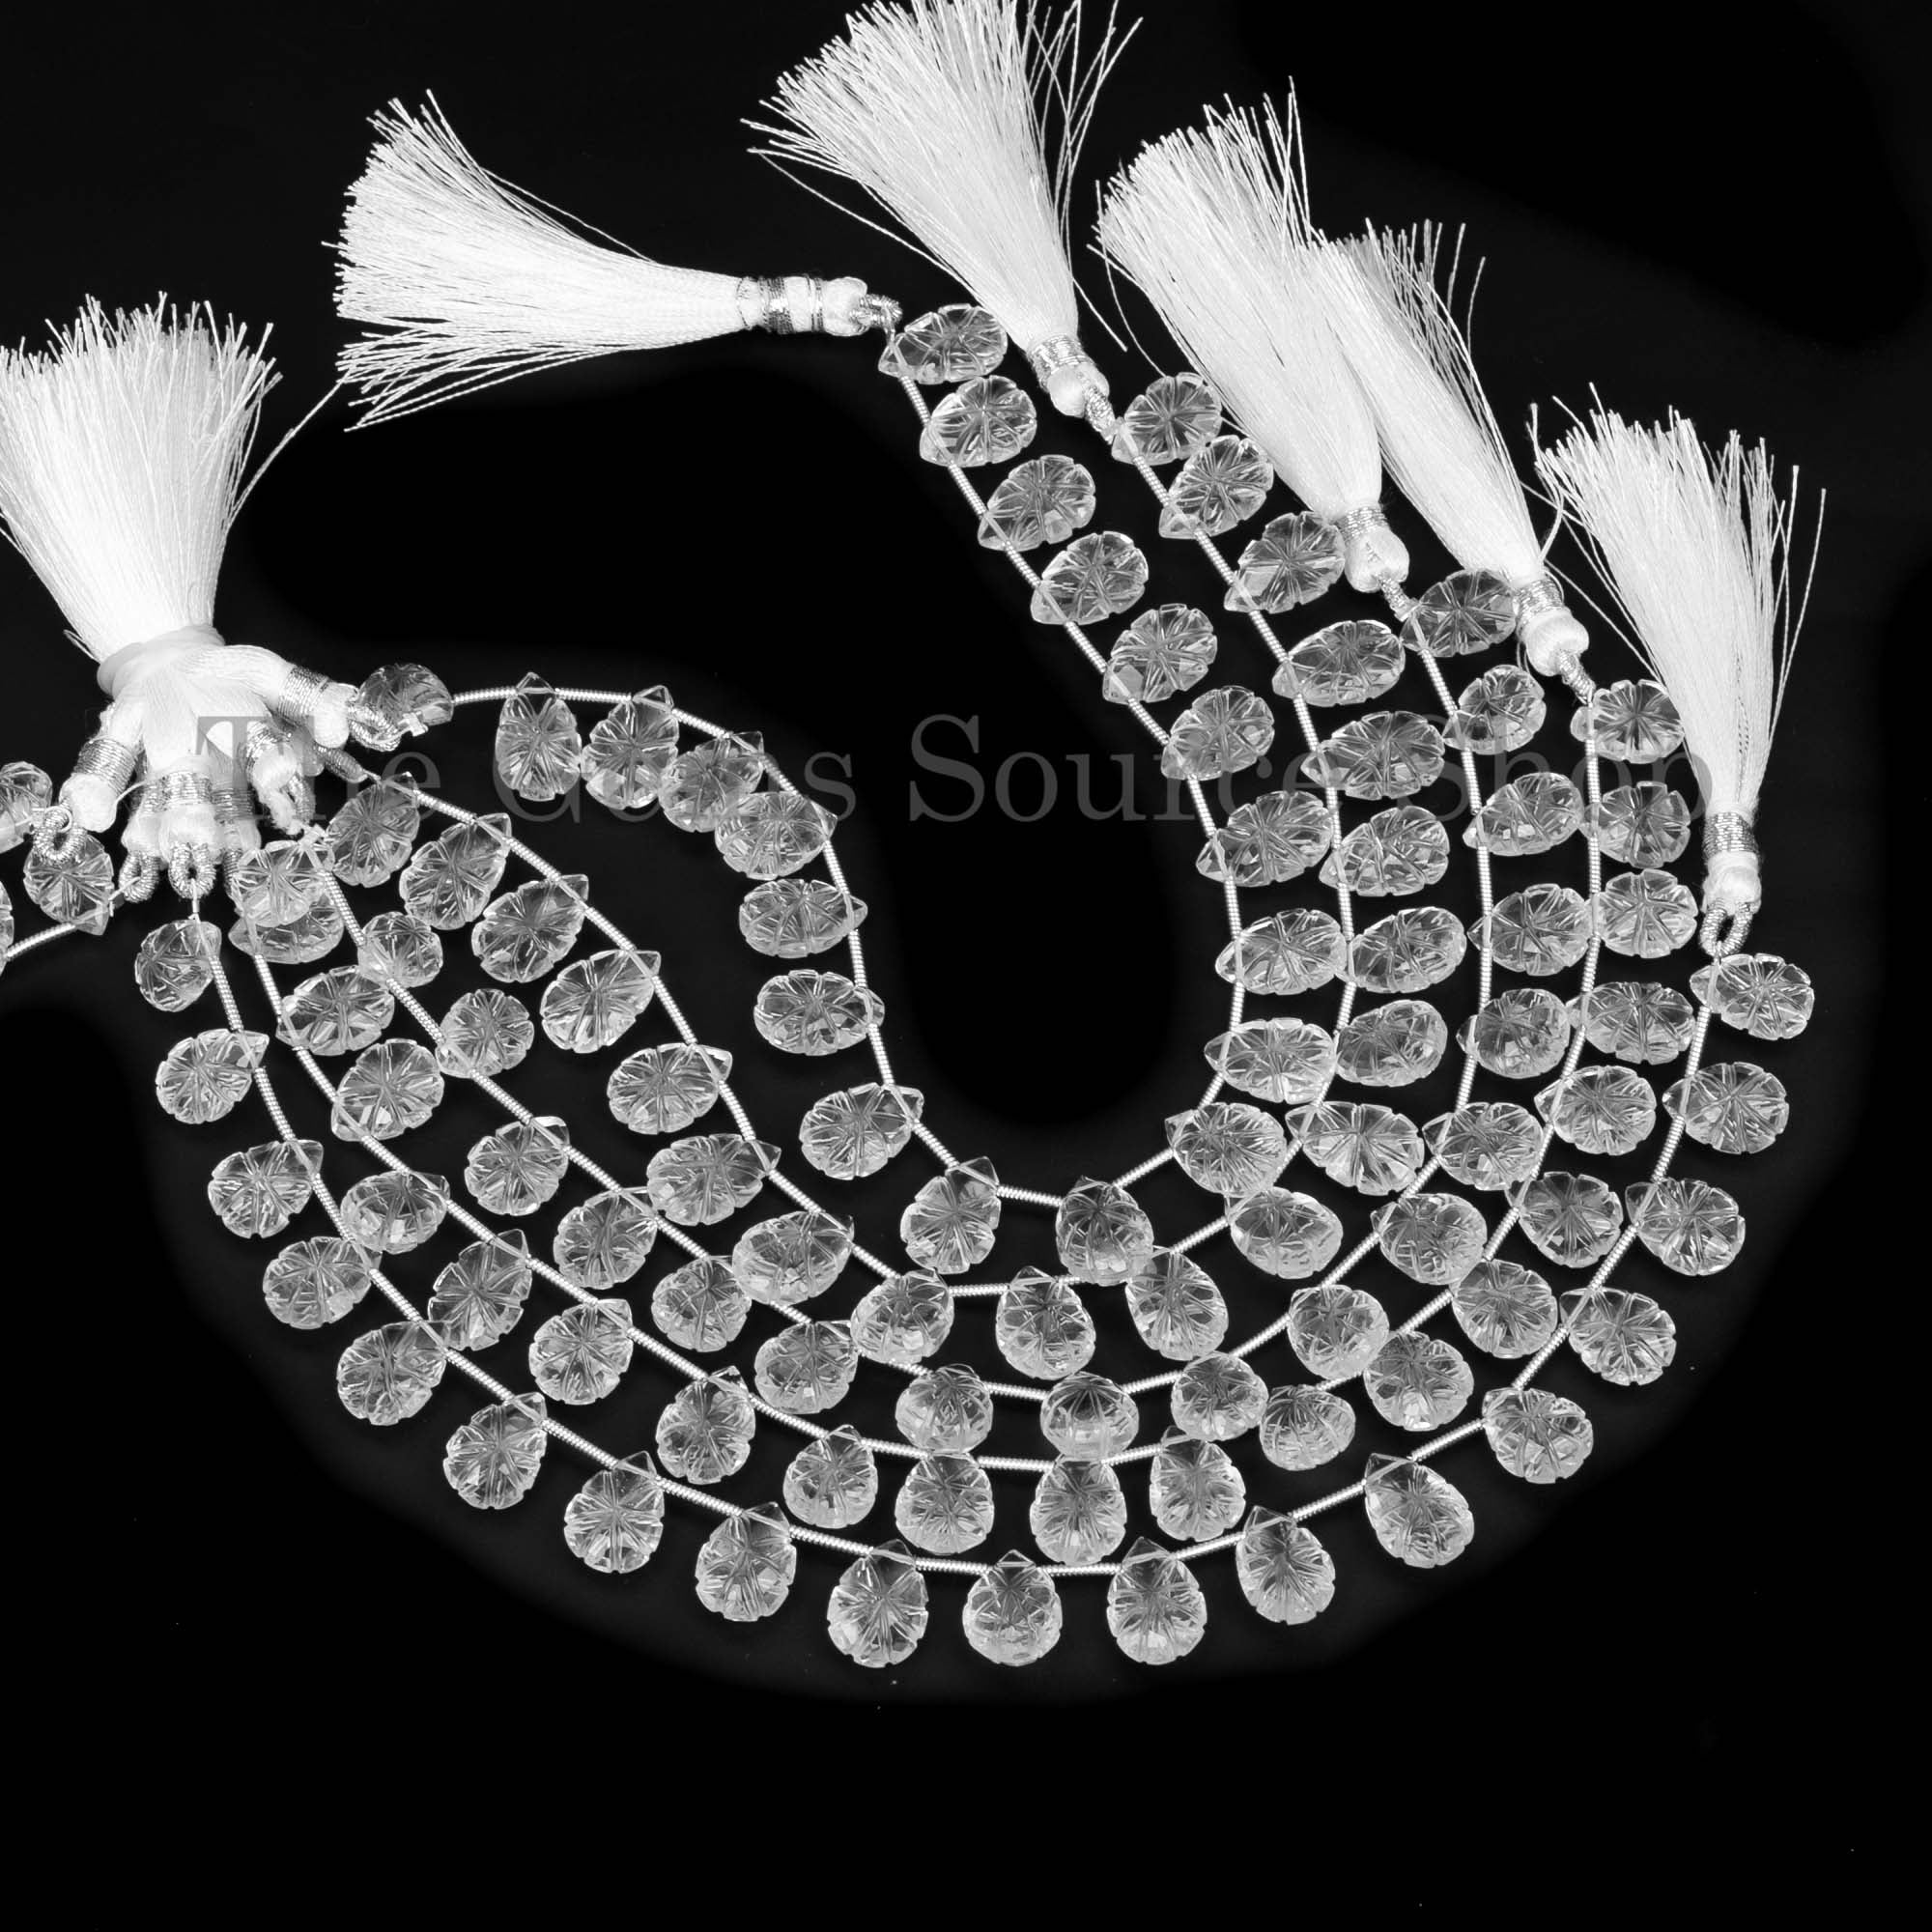 Extremely Rare Crystal Quartz Pear Cut Carving Beads, Crystal Quartz Carving Beads